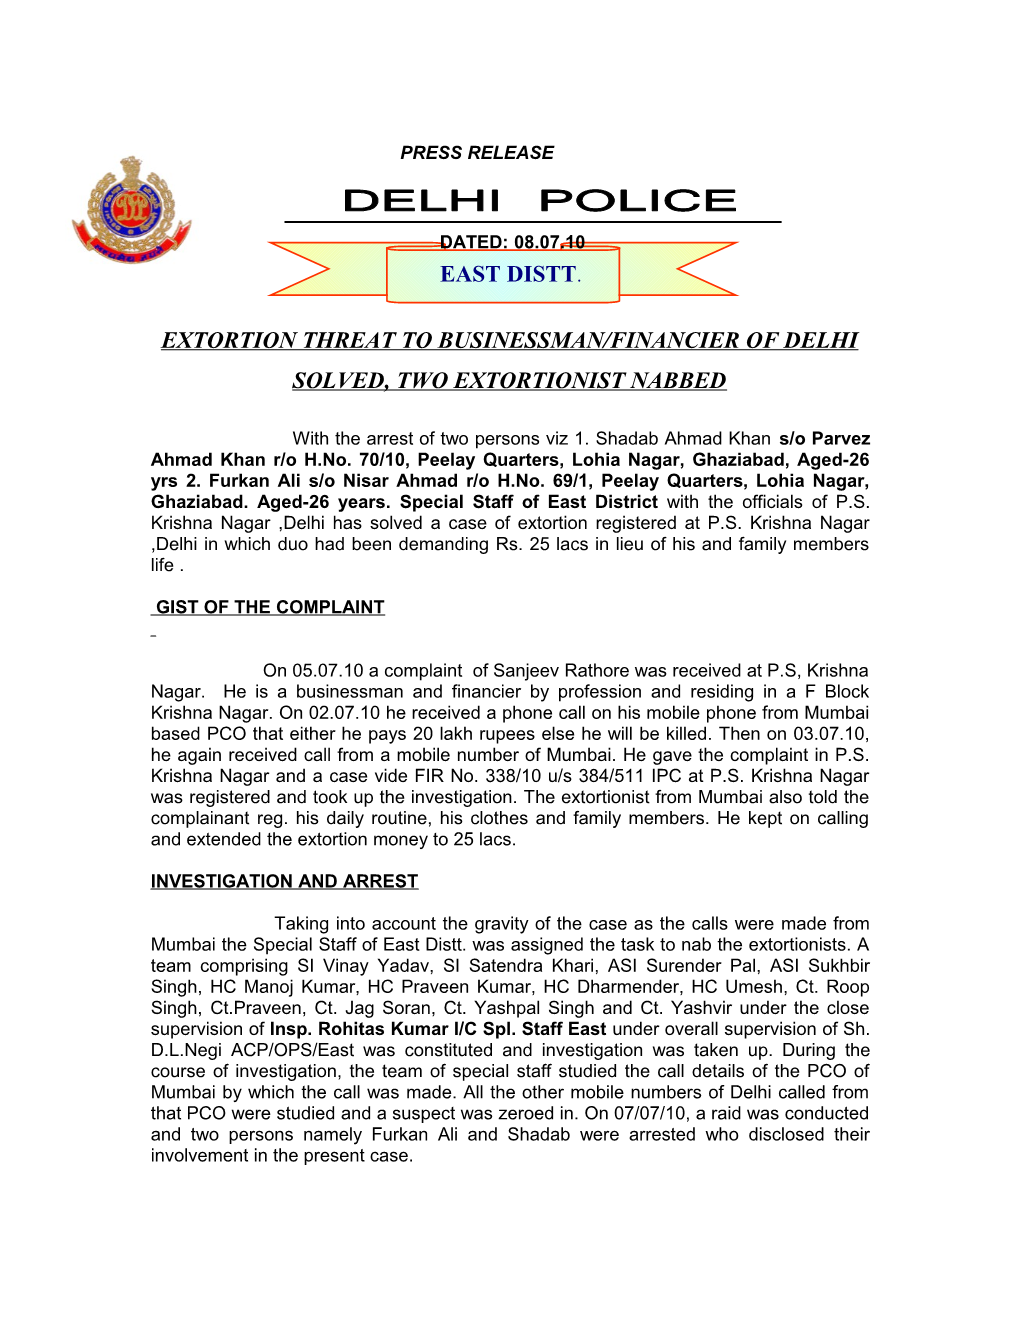 Extortion Threat to Businessman/Financier of Delhi Solved, Two Extortionist Nabbed